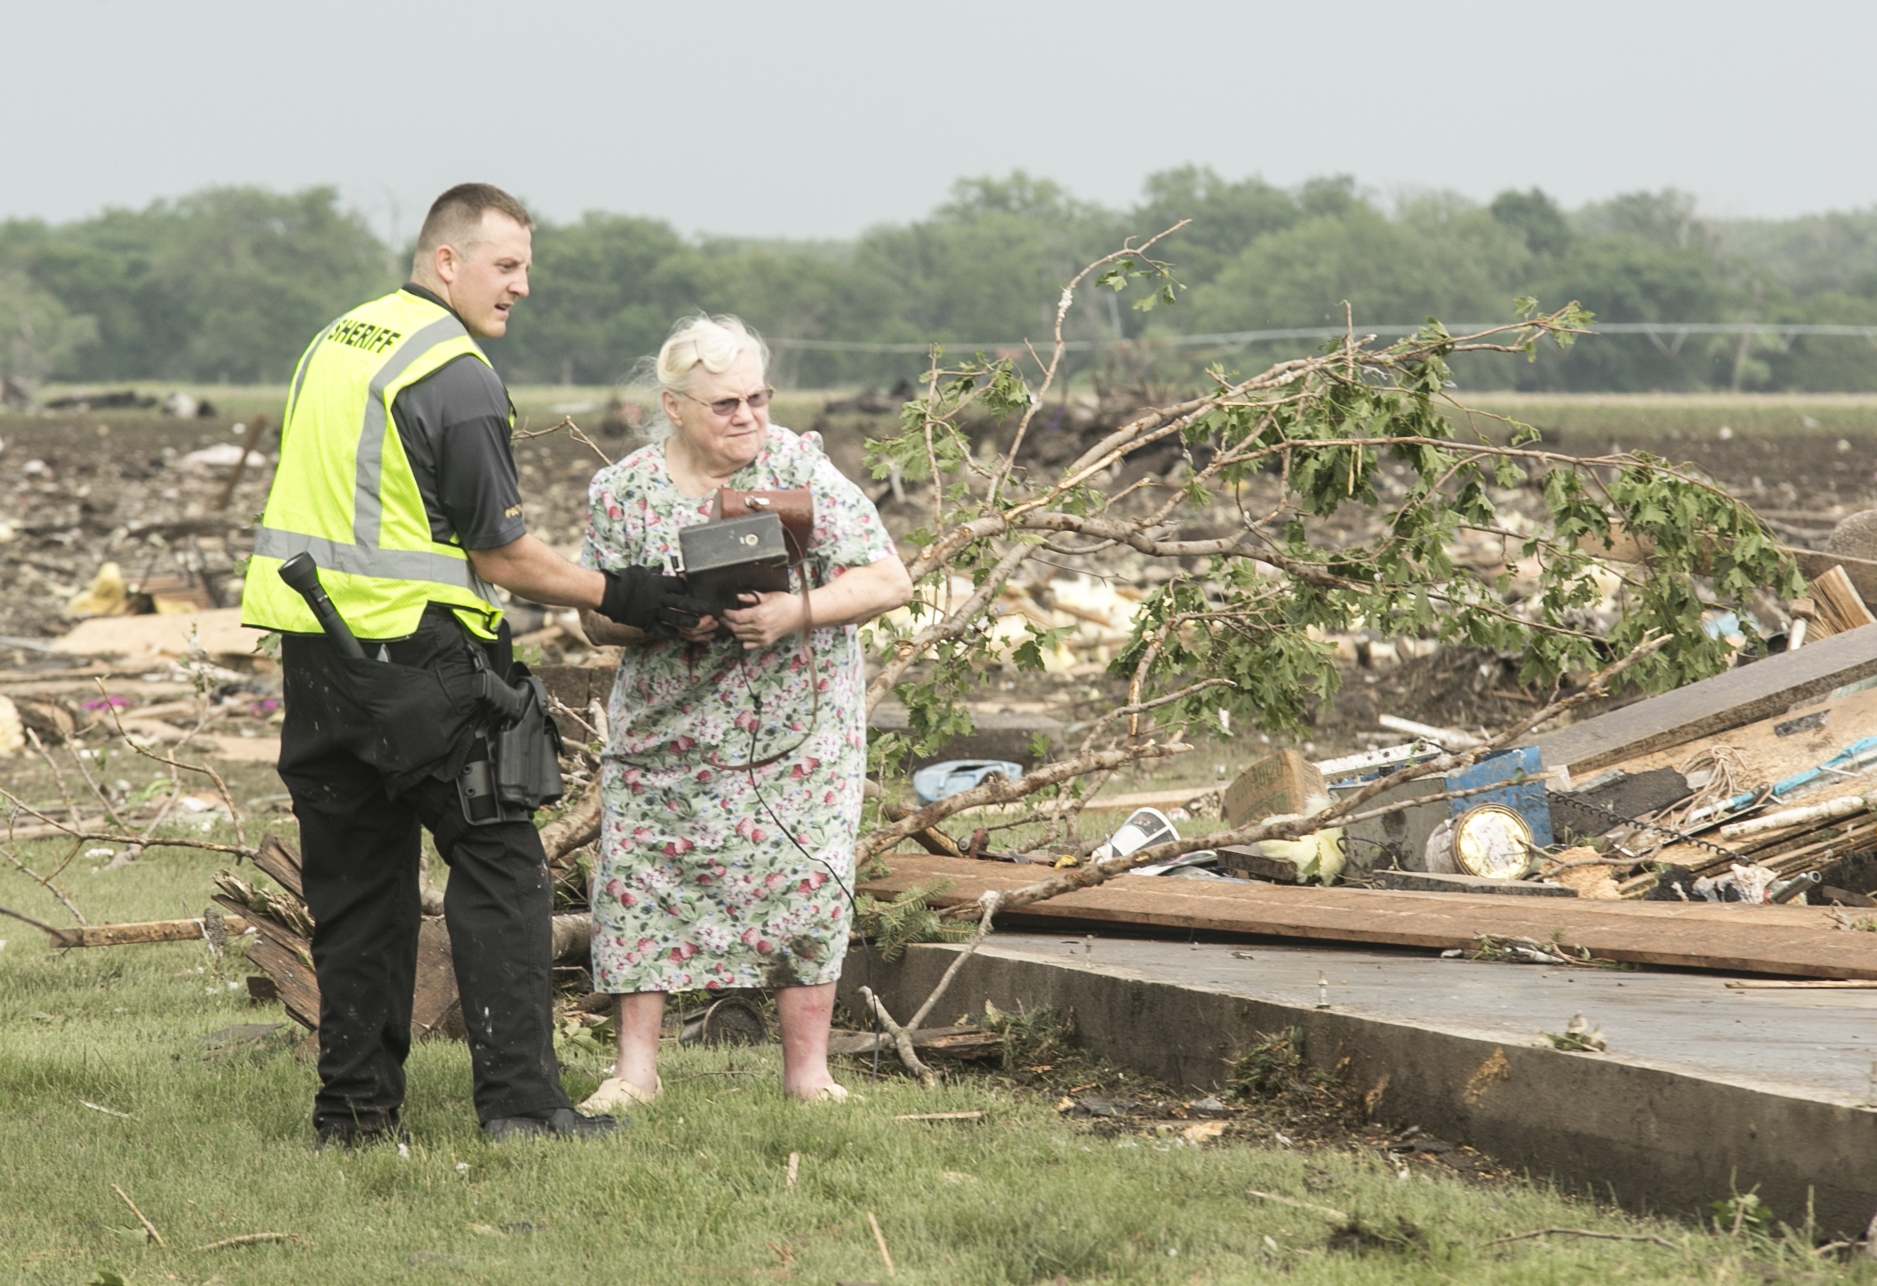 Ruth Labenz is assisted to safety by a Stanton County Sherriff's officer after her home was destroyed in the town of Pilger, Neb. Monday, June 16, 2014. At least one person is dead and at least 16 more are in critical condition after two massive tornadoes swept through northeast Nebraska on Monday. (AP Photo/Mark 'Storm' Farnik)